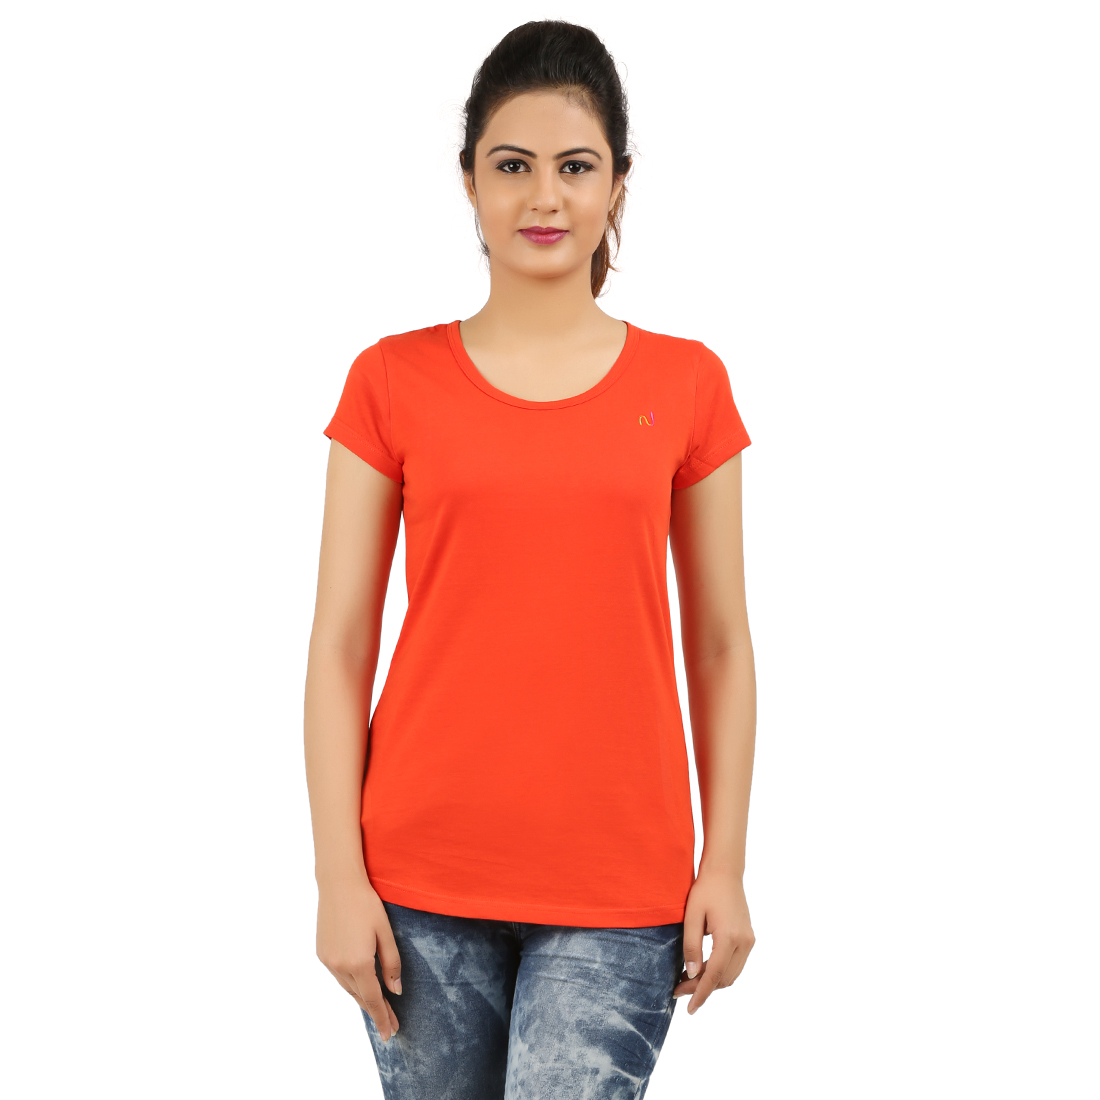 Buy New Darling Womens Orange Color T-Shirt Online @ ₹299 from ShopClues